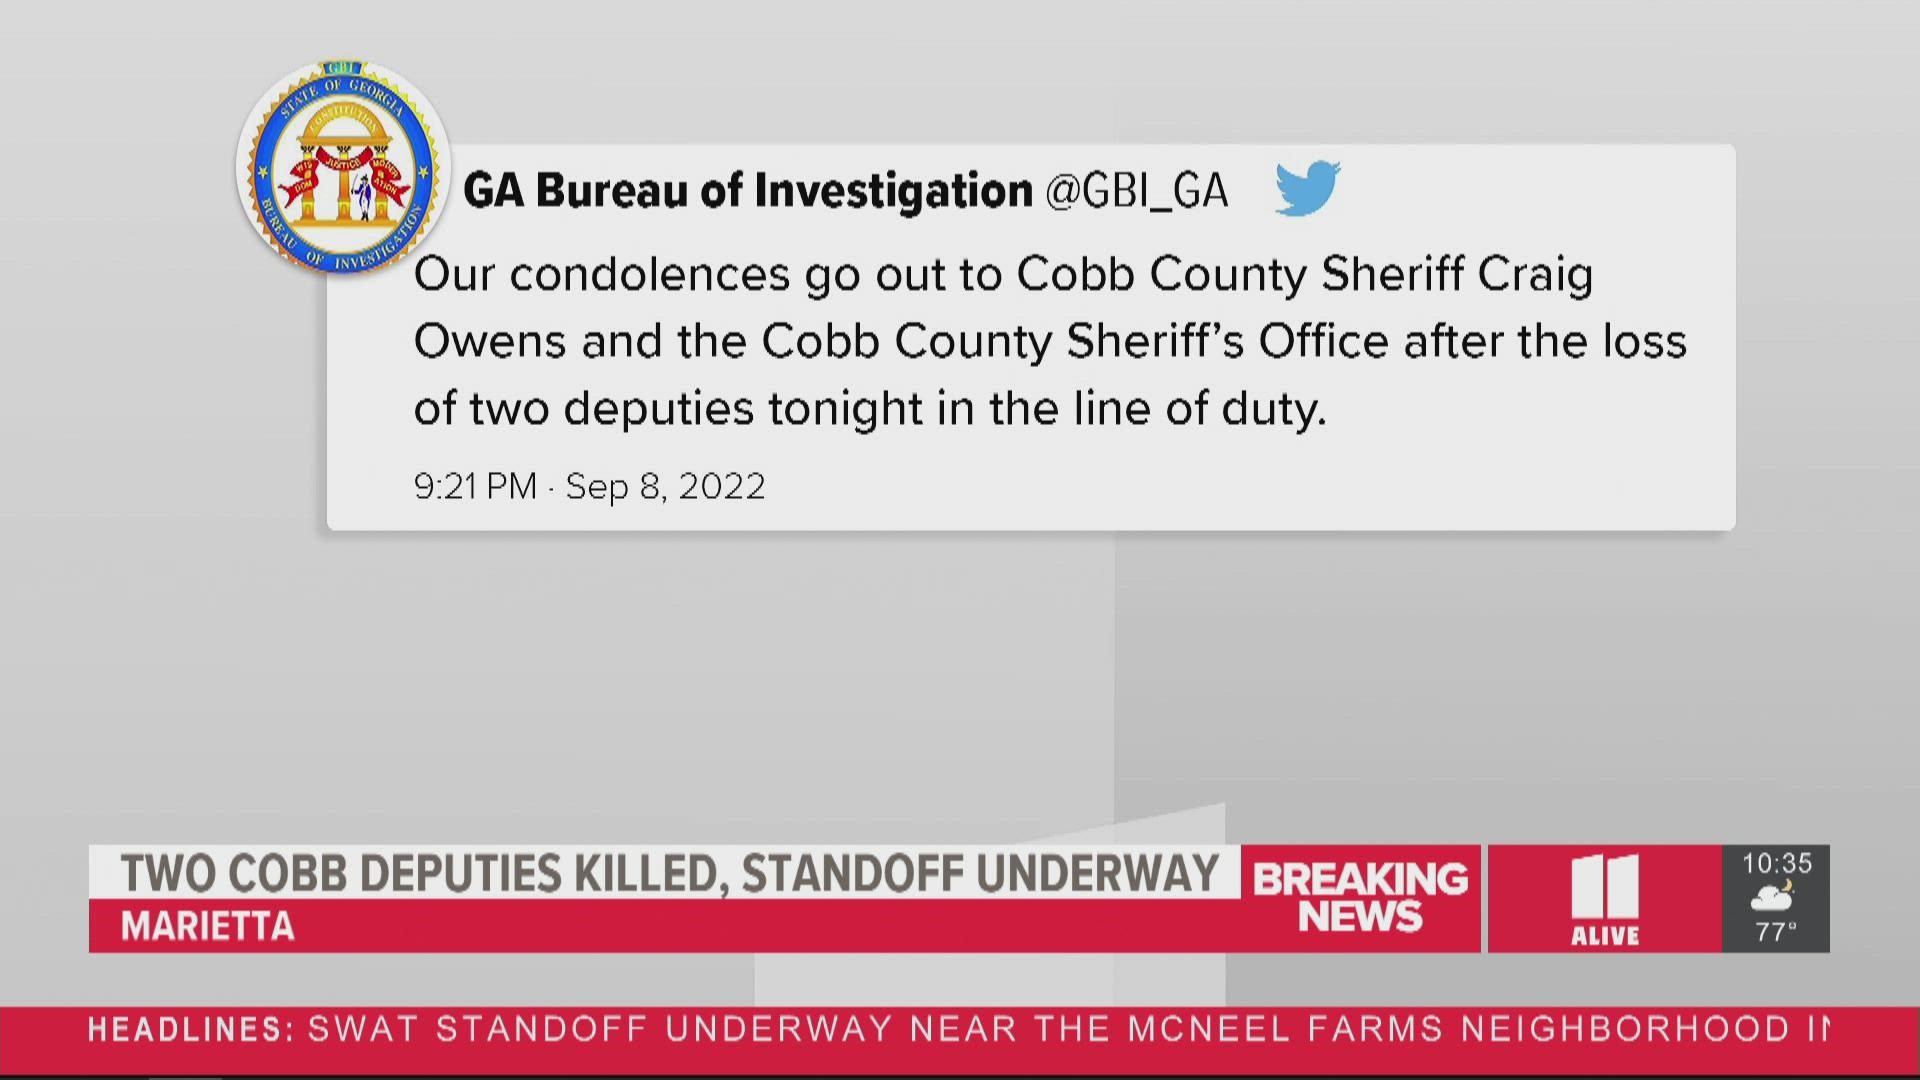 Several different law enforcement agencies are sending support to the Cobb County Sheriff's Office